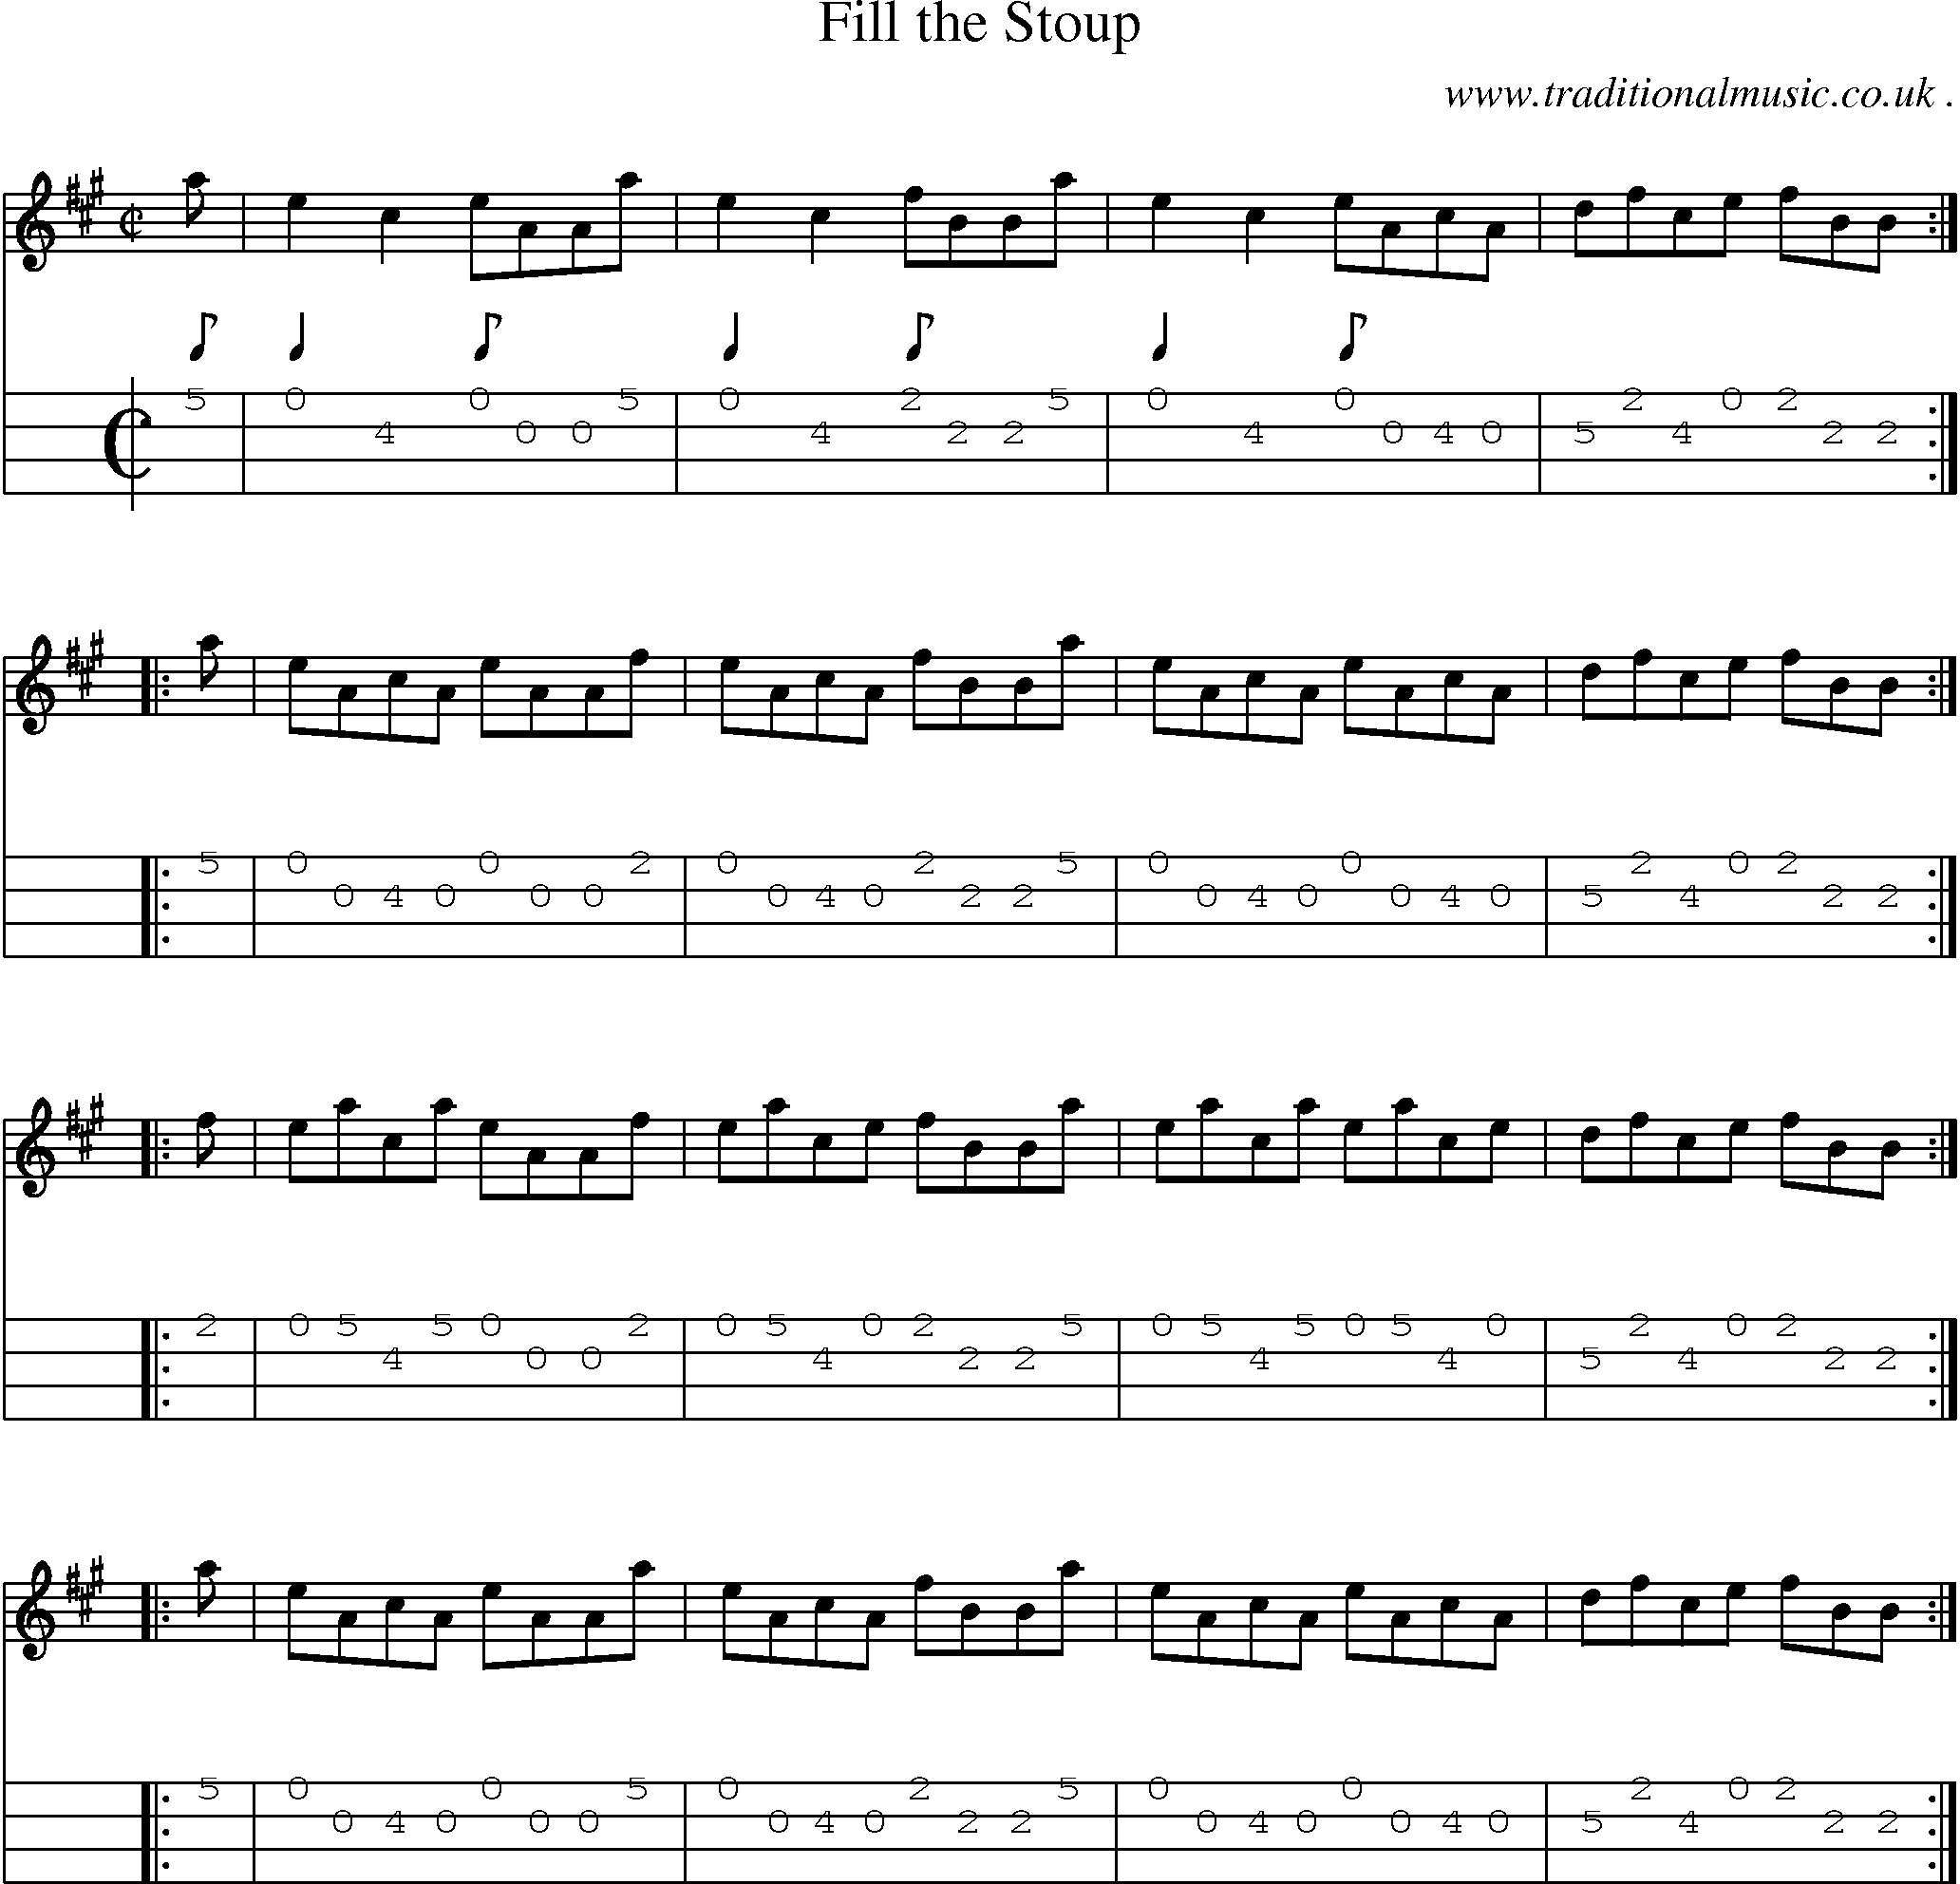 Sheet-music  score, Chords and Mandolin Tabs for Fill The Stoup